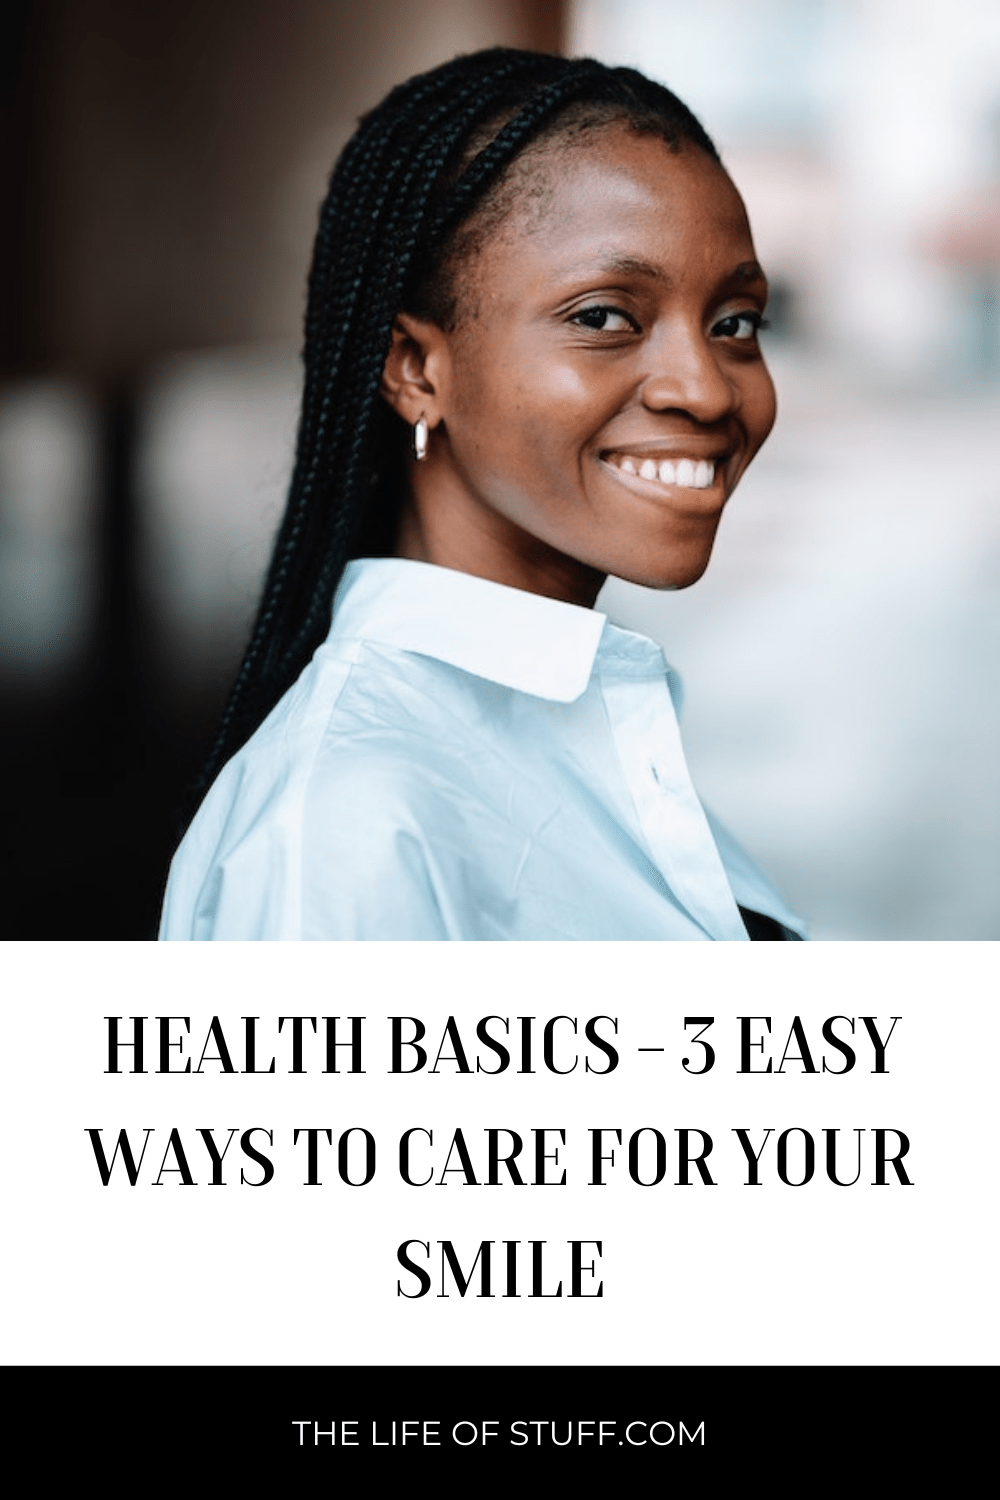 Health Basics - 3 Easy Ways To Care For Your Smile - The LIfe of Stuff.com